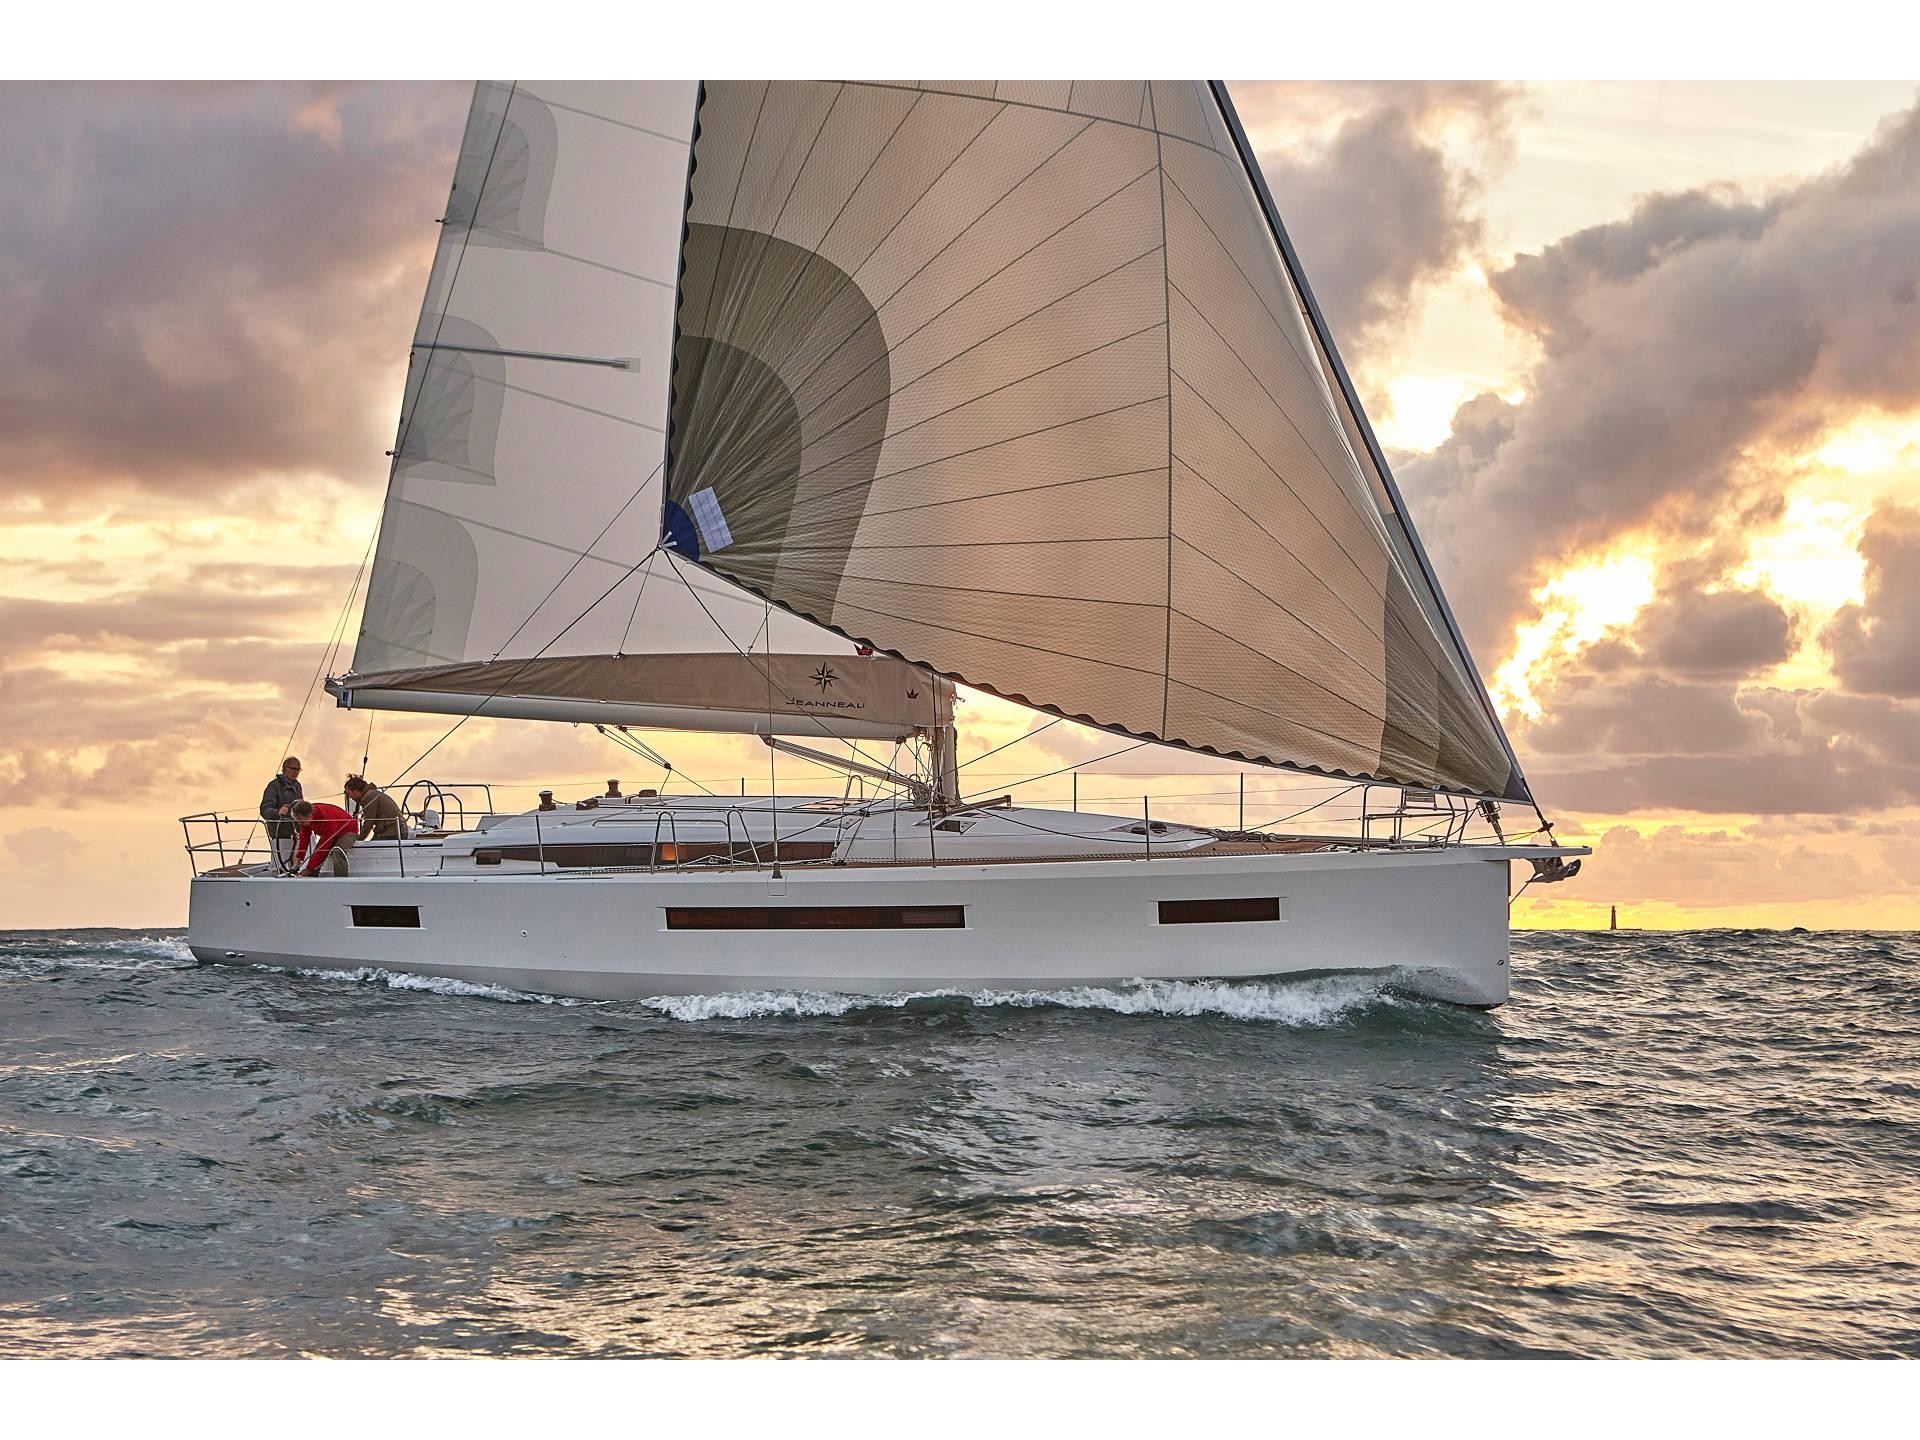 Oceanis 51.1 - Sailboat Charter The Canaries & Boat hire in Spain Canary Islands Gran Canaria Las Palmas Las Palmas de Gran Canaria 1